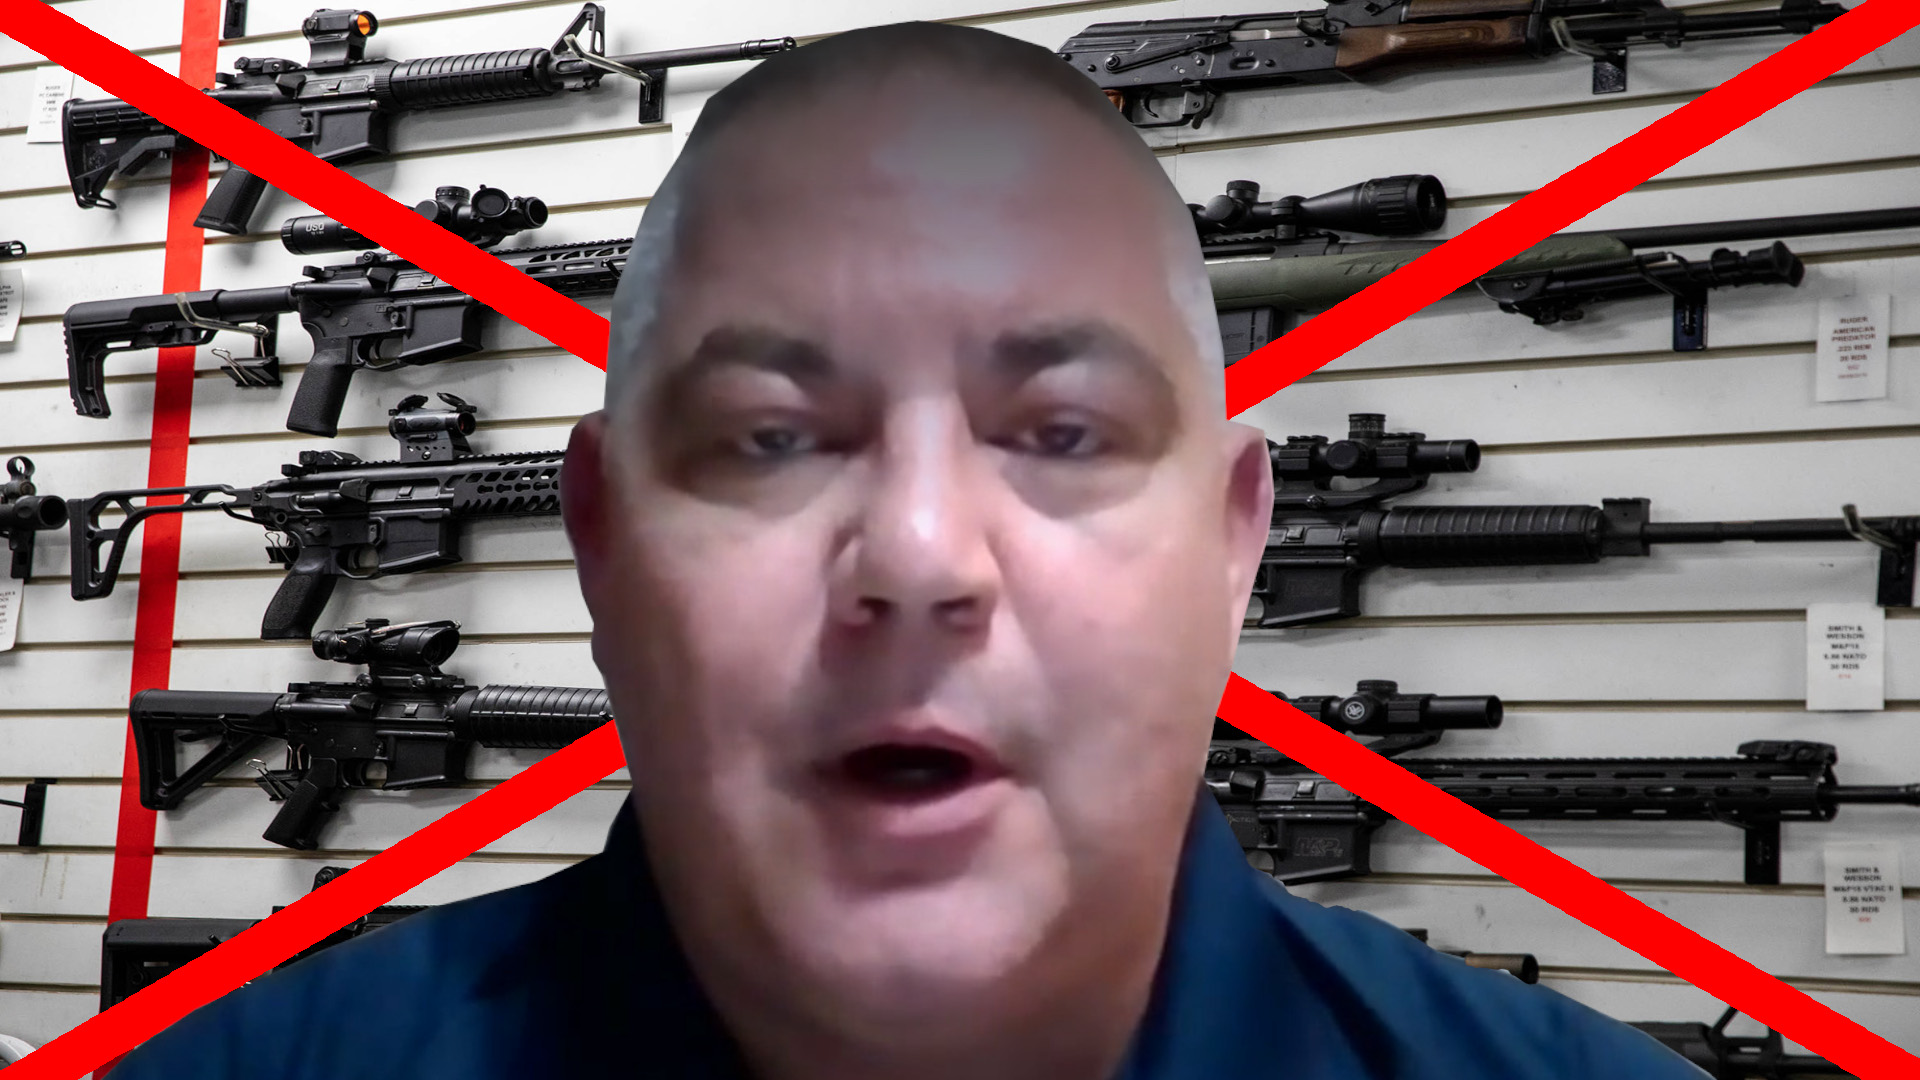 McLean County Sheriff Matt Lane over an image of assault weapons with a red X crossing them out